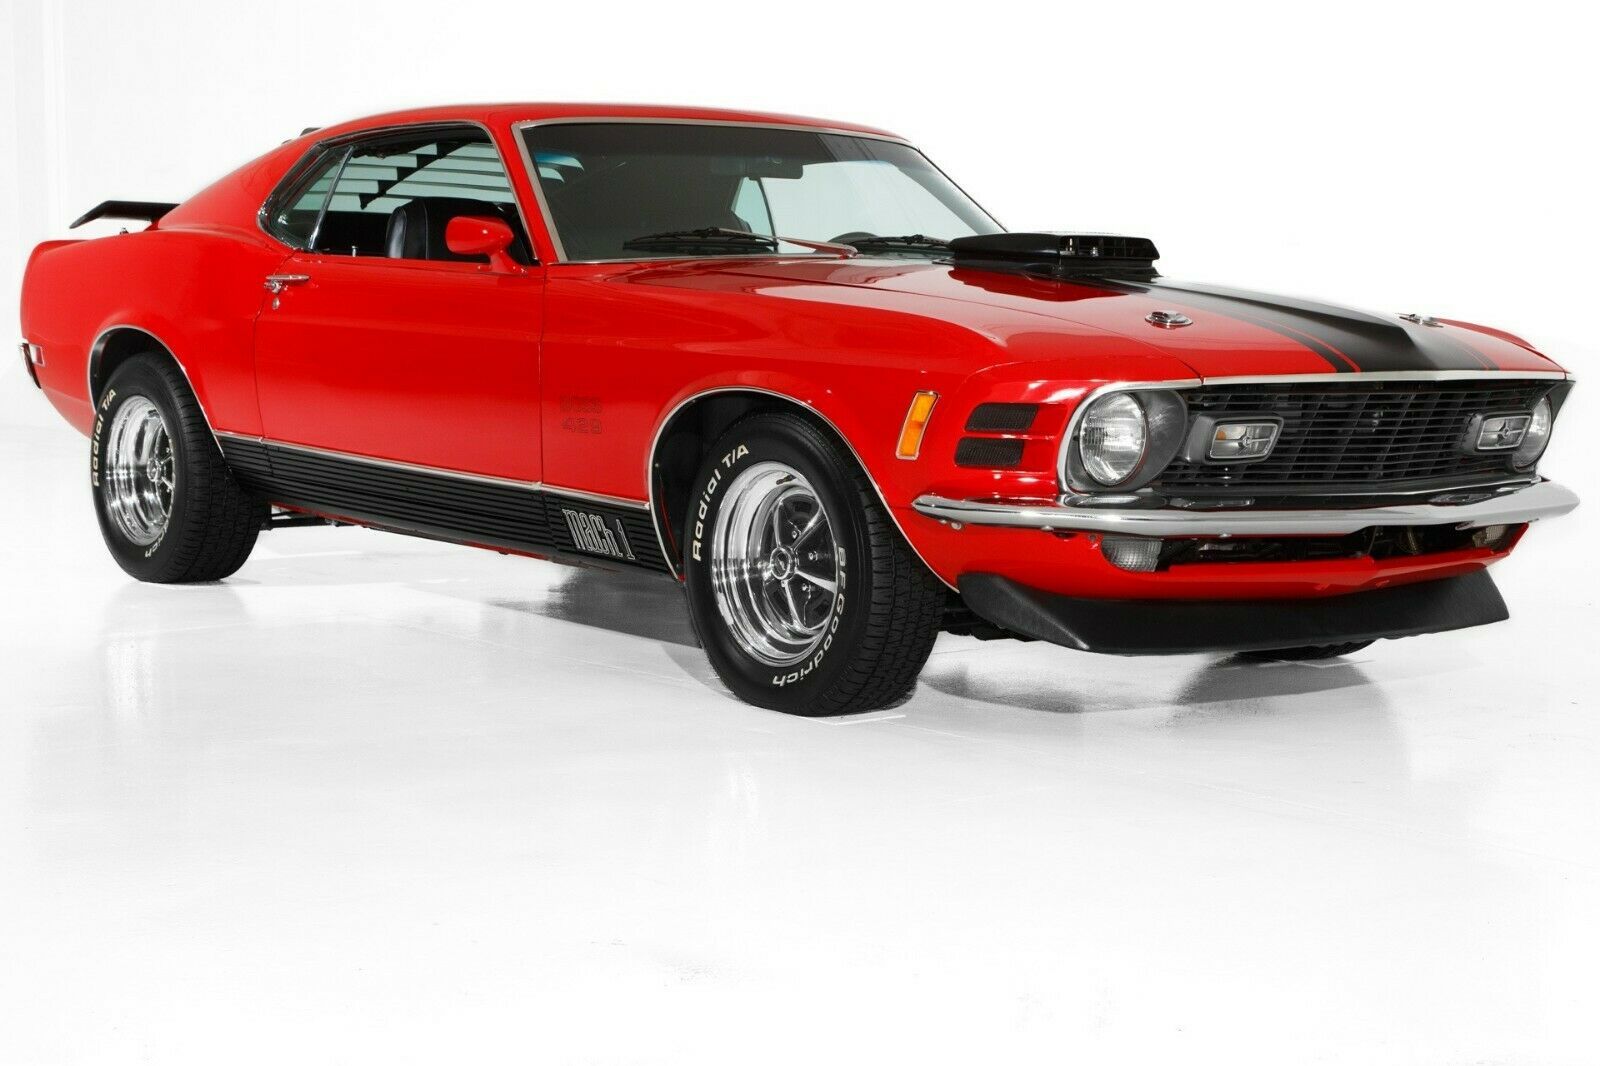 1970 Ford Mustang BOSS 429 red 24x36 inch poster | Ready to ship now - £17.21 GBP